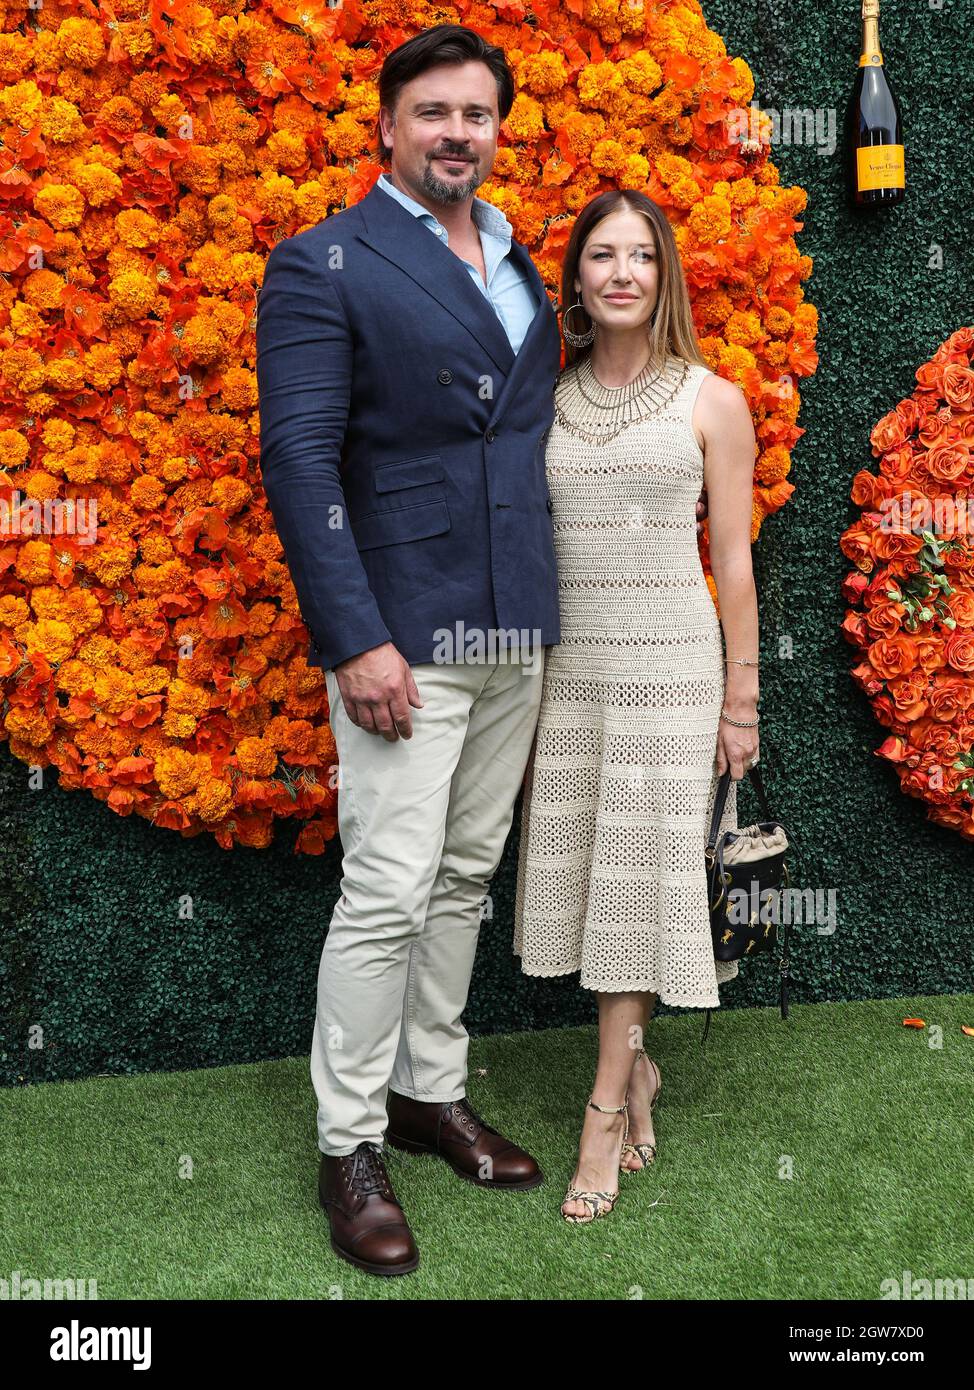 PACIFIC PALISADES, LOS ANGELES, CALIFORNIA, USA - OCTOBER 02: Actor Tom Welling and wife Jessica Rose Lee Welling arrive at the Veuve Clicquot Polo Classic Los Angeles 2021 held at the Will Rogers State Historic Park on October 2, 2021 in Pacific Palisades, Los Angeles, California, United States. (Photo by Xavier Collin/Image Press Agency/Sipa USA) Stock Photo